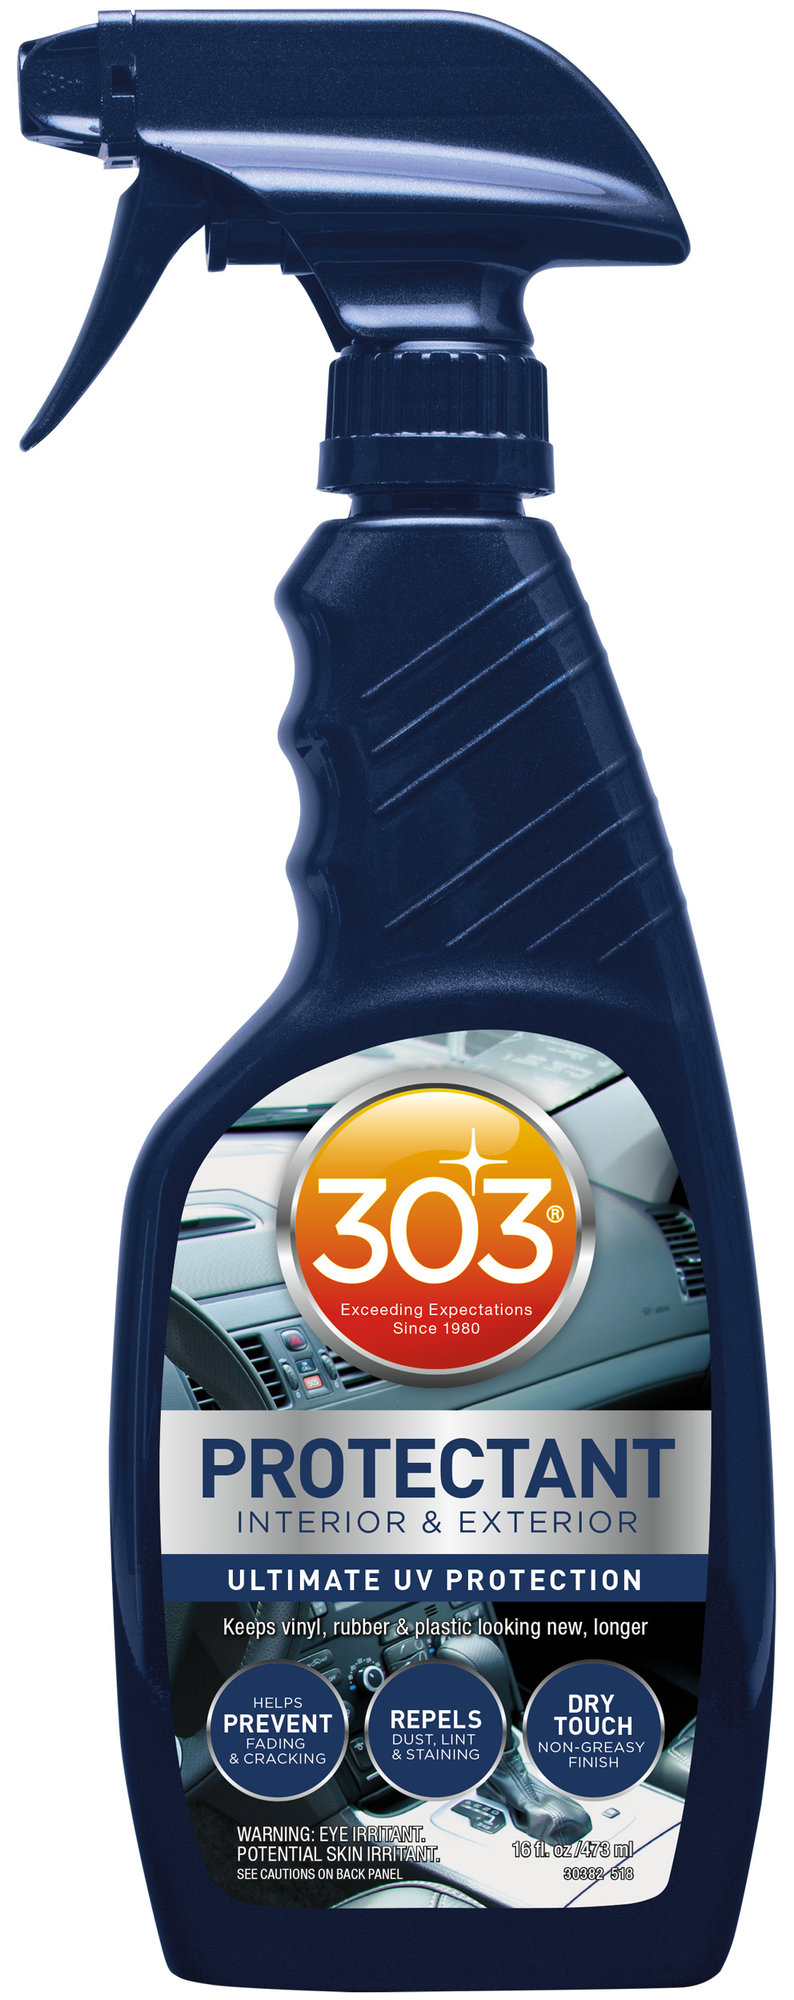 303 Convertible Vinyl Top Cleaning and Care Kit - Cleans And Protects Vinyl  Tops - Includes 303 Tonneau Cover And Convertible Top Cleaner 16 fl. oz. +  303 Automotive Protectant 16 fl. oz., (30510) 